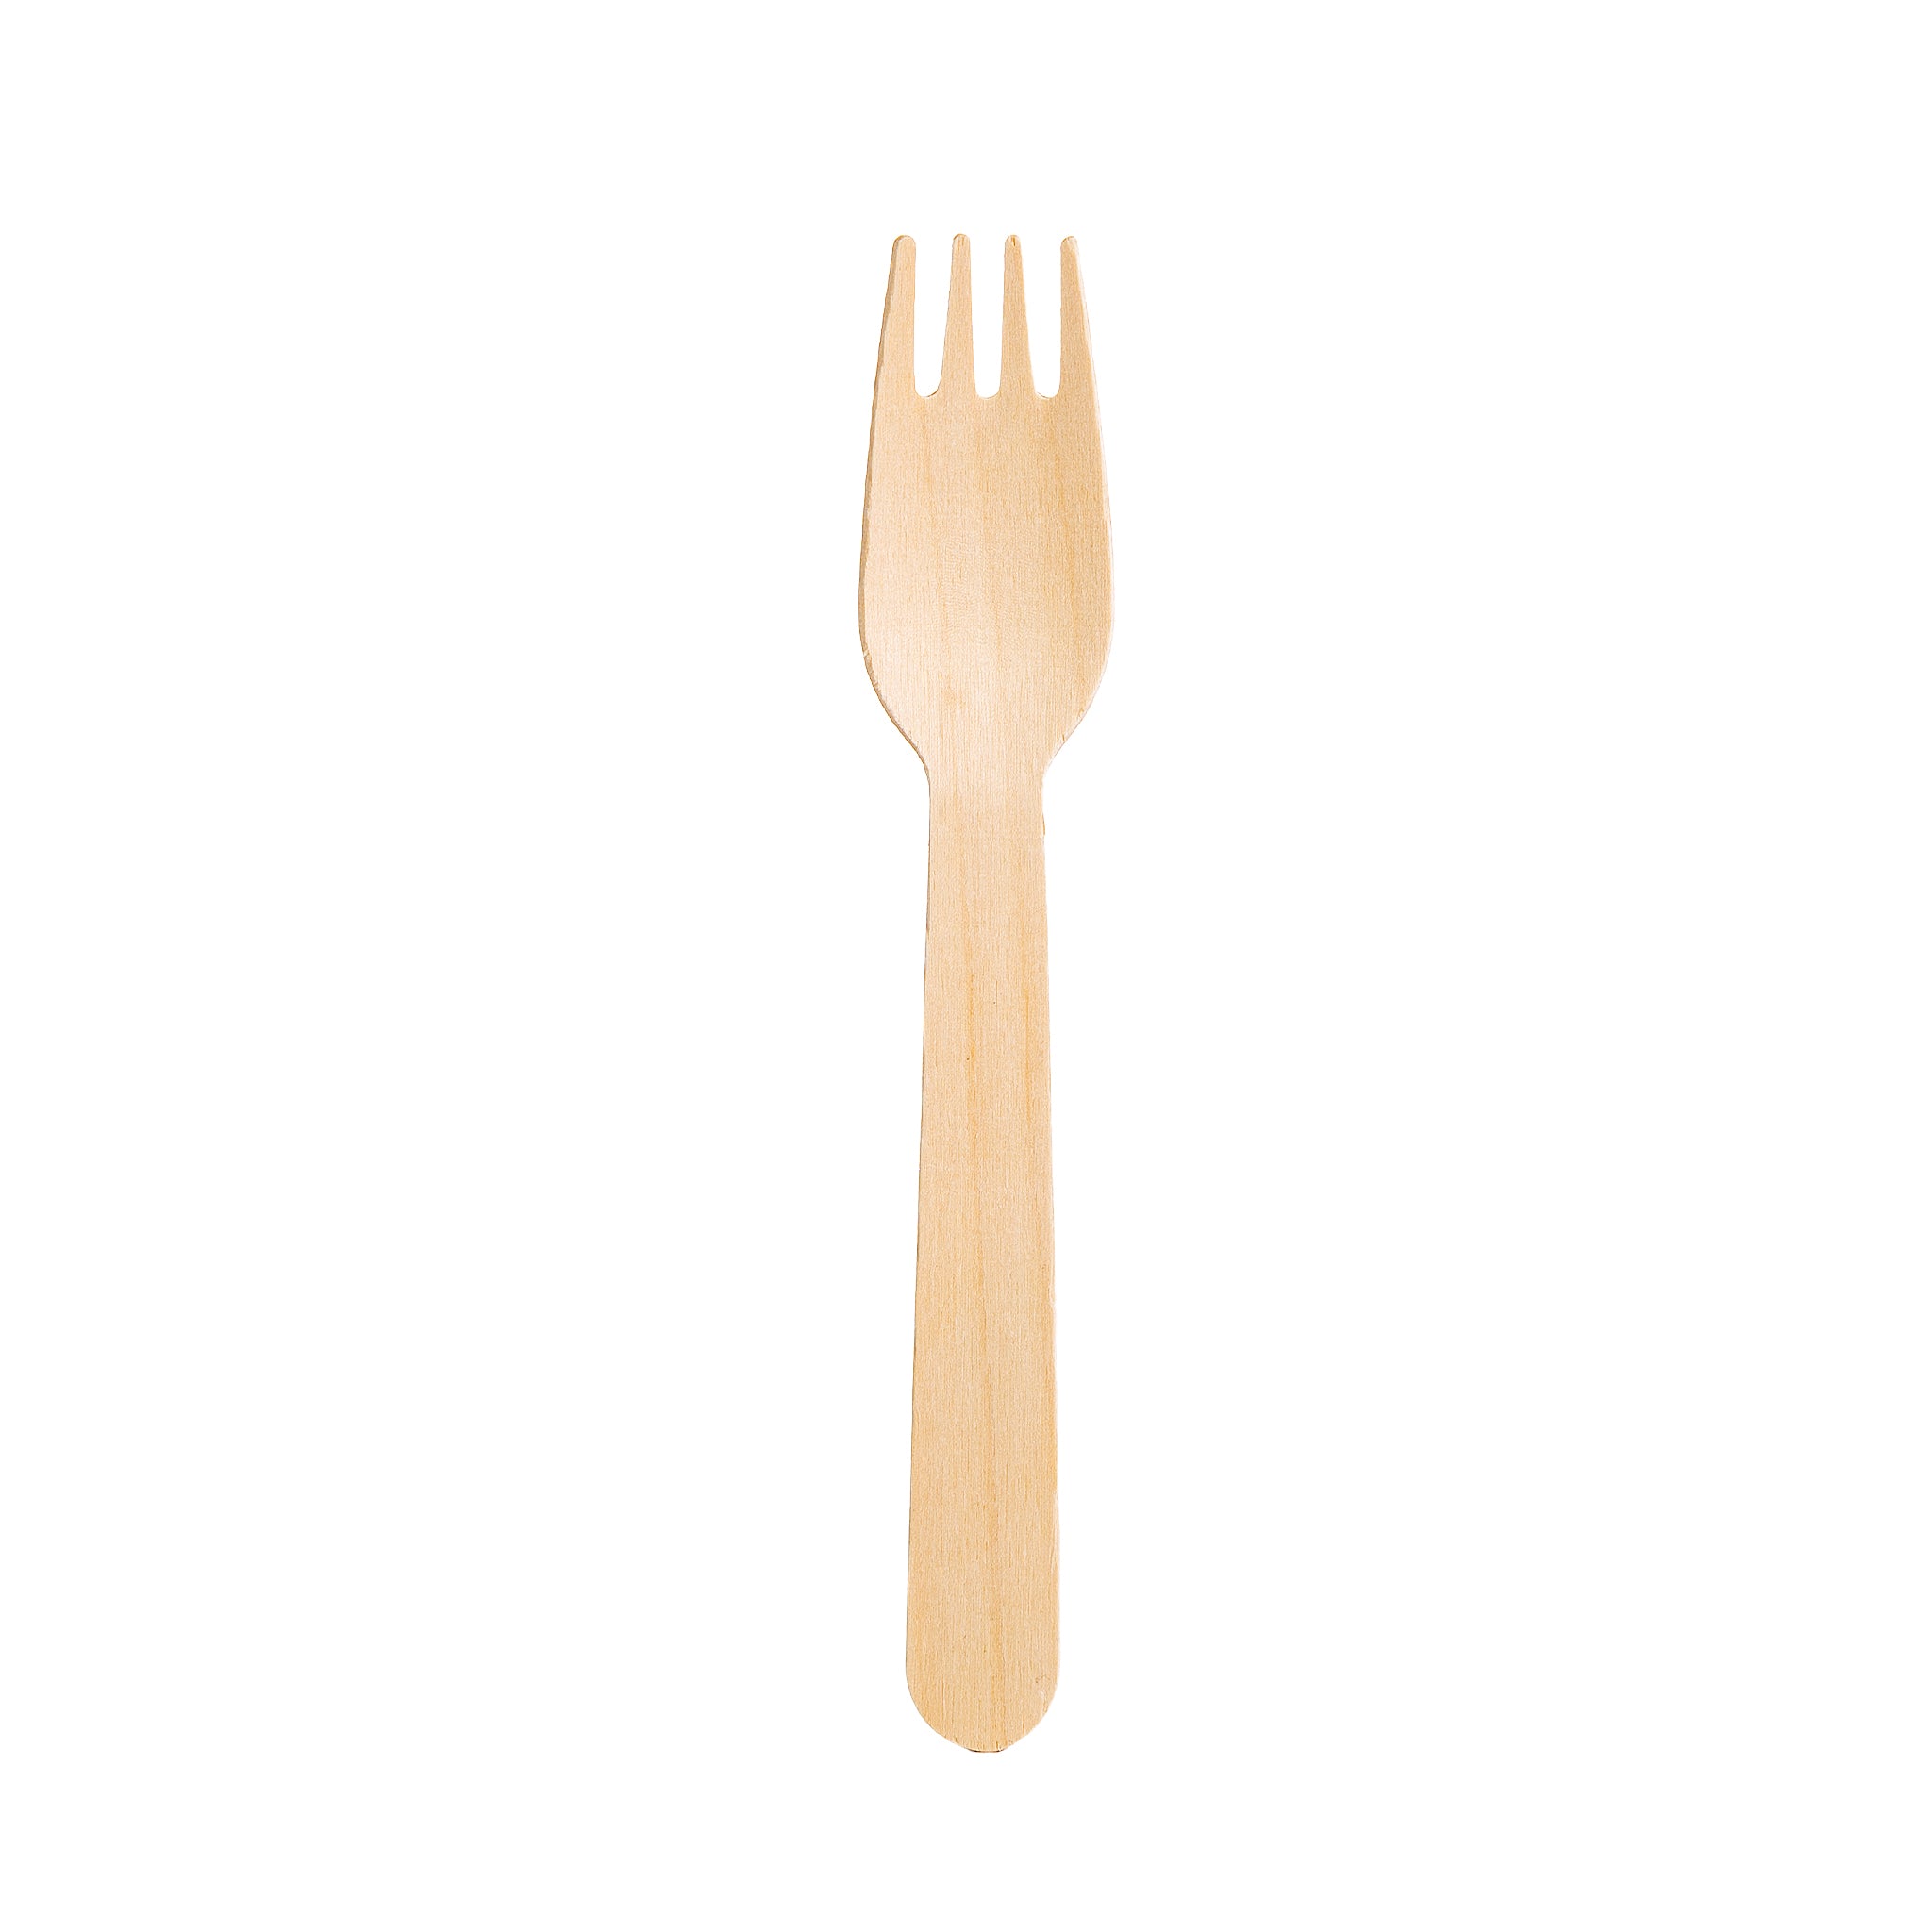 WoodU Disposable Wooden Forks 100 pcs All Natural Eco-friendly Non-toxic